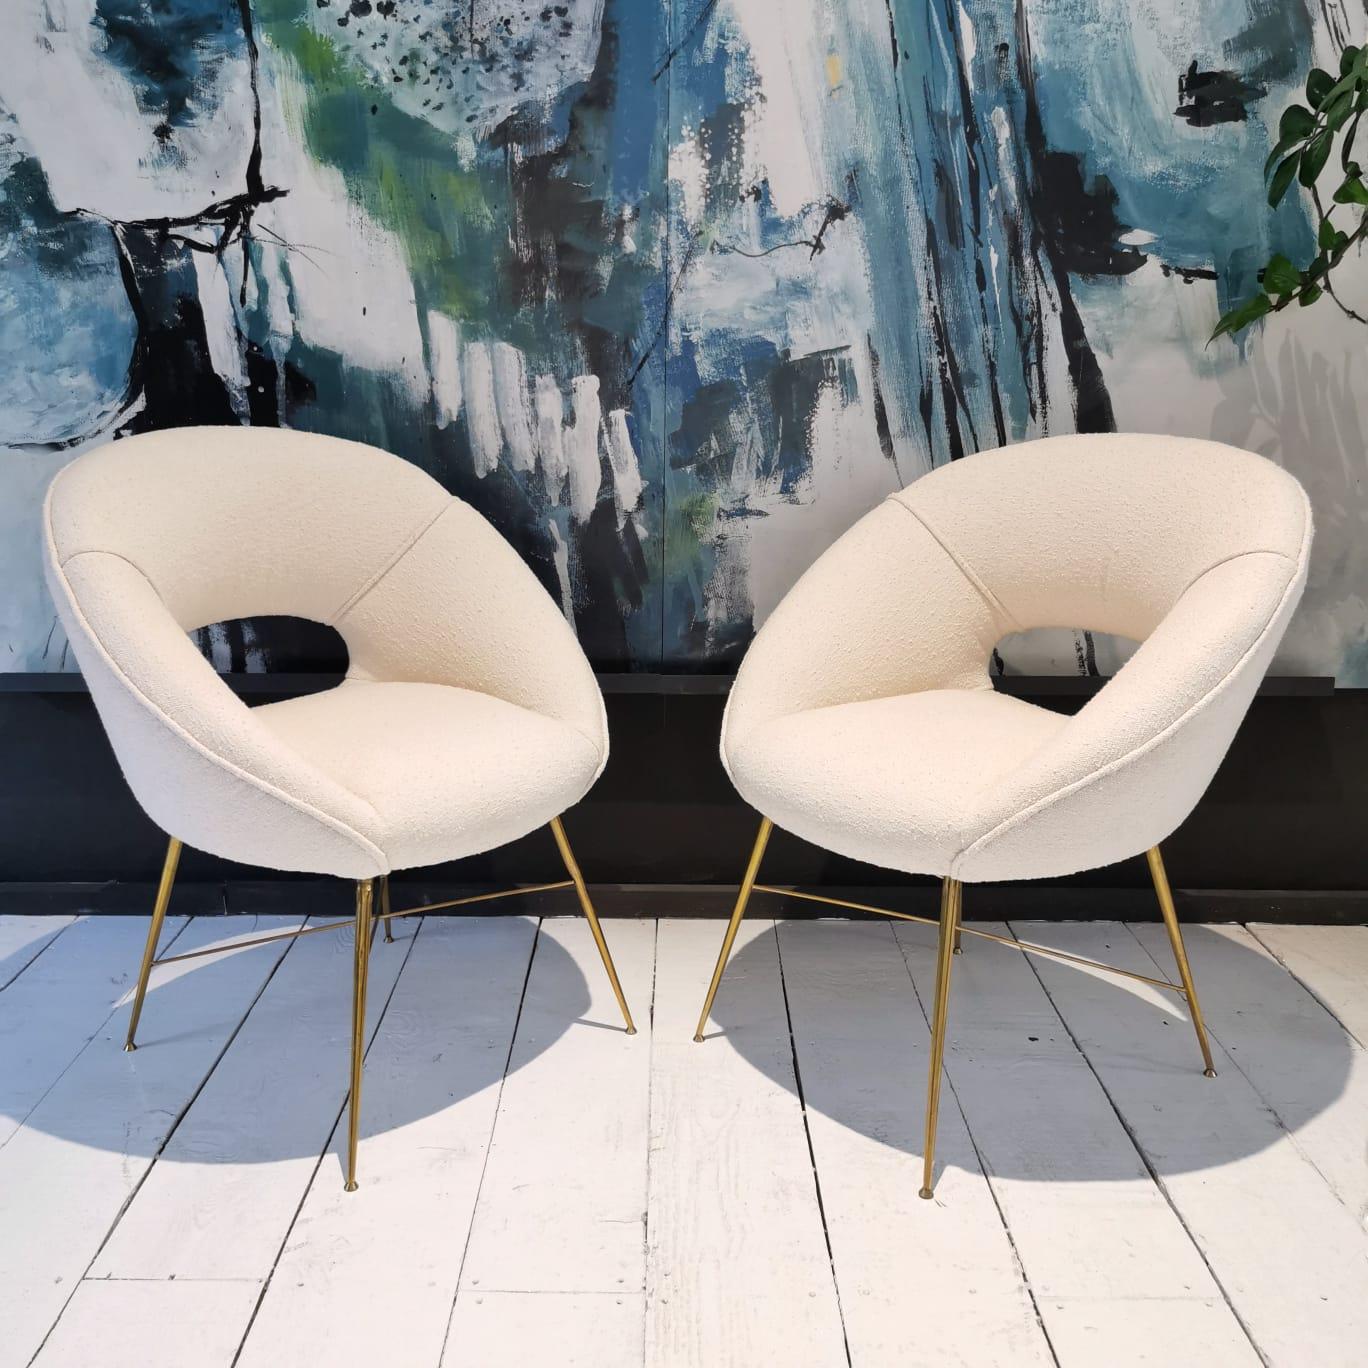 this pair of armchairs by Silvio Cavatorta were used both as bedroom armchairs and as living room armchairs.
They can be purchased individually or in pairs.
They were reupholstered with a high-quality fabric 
The legs of the small armchair are made